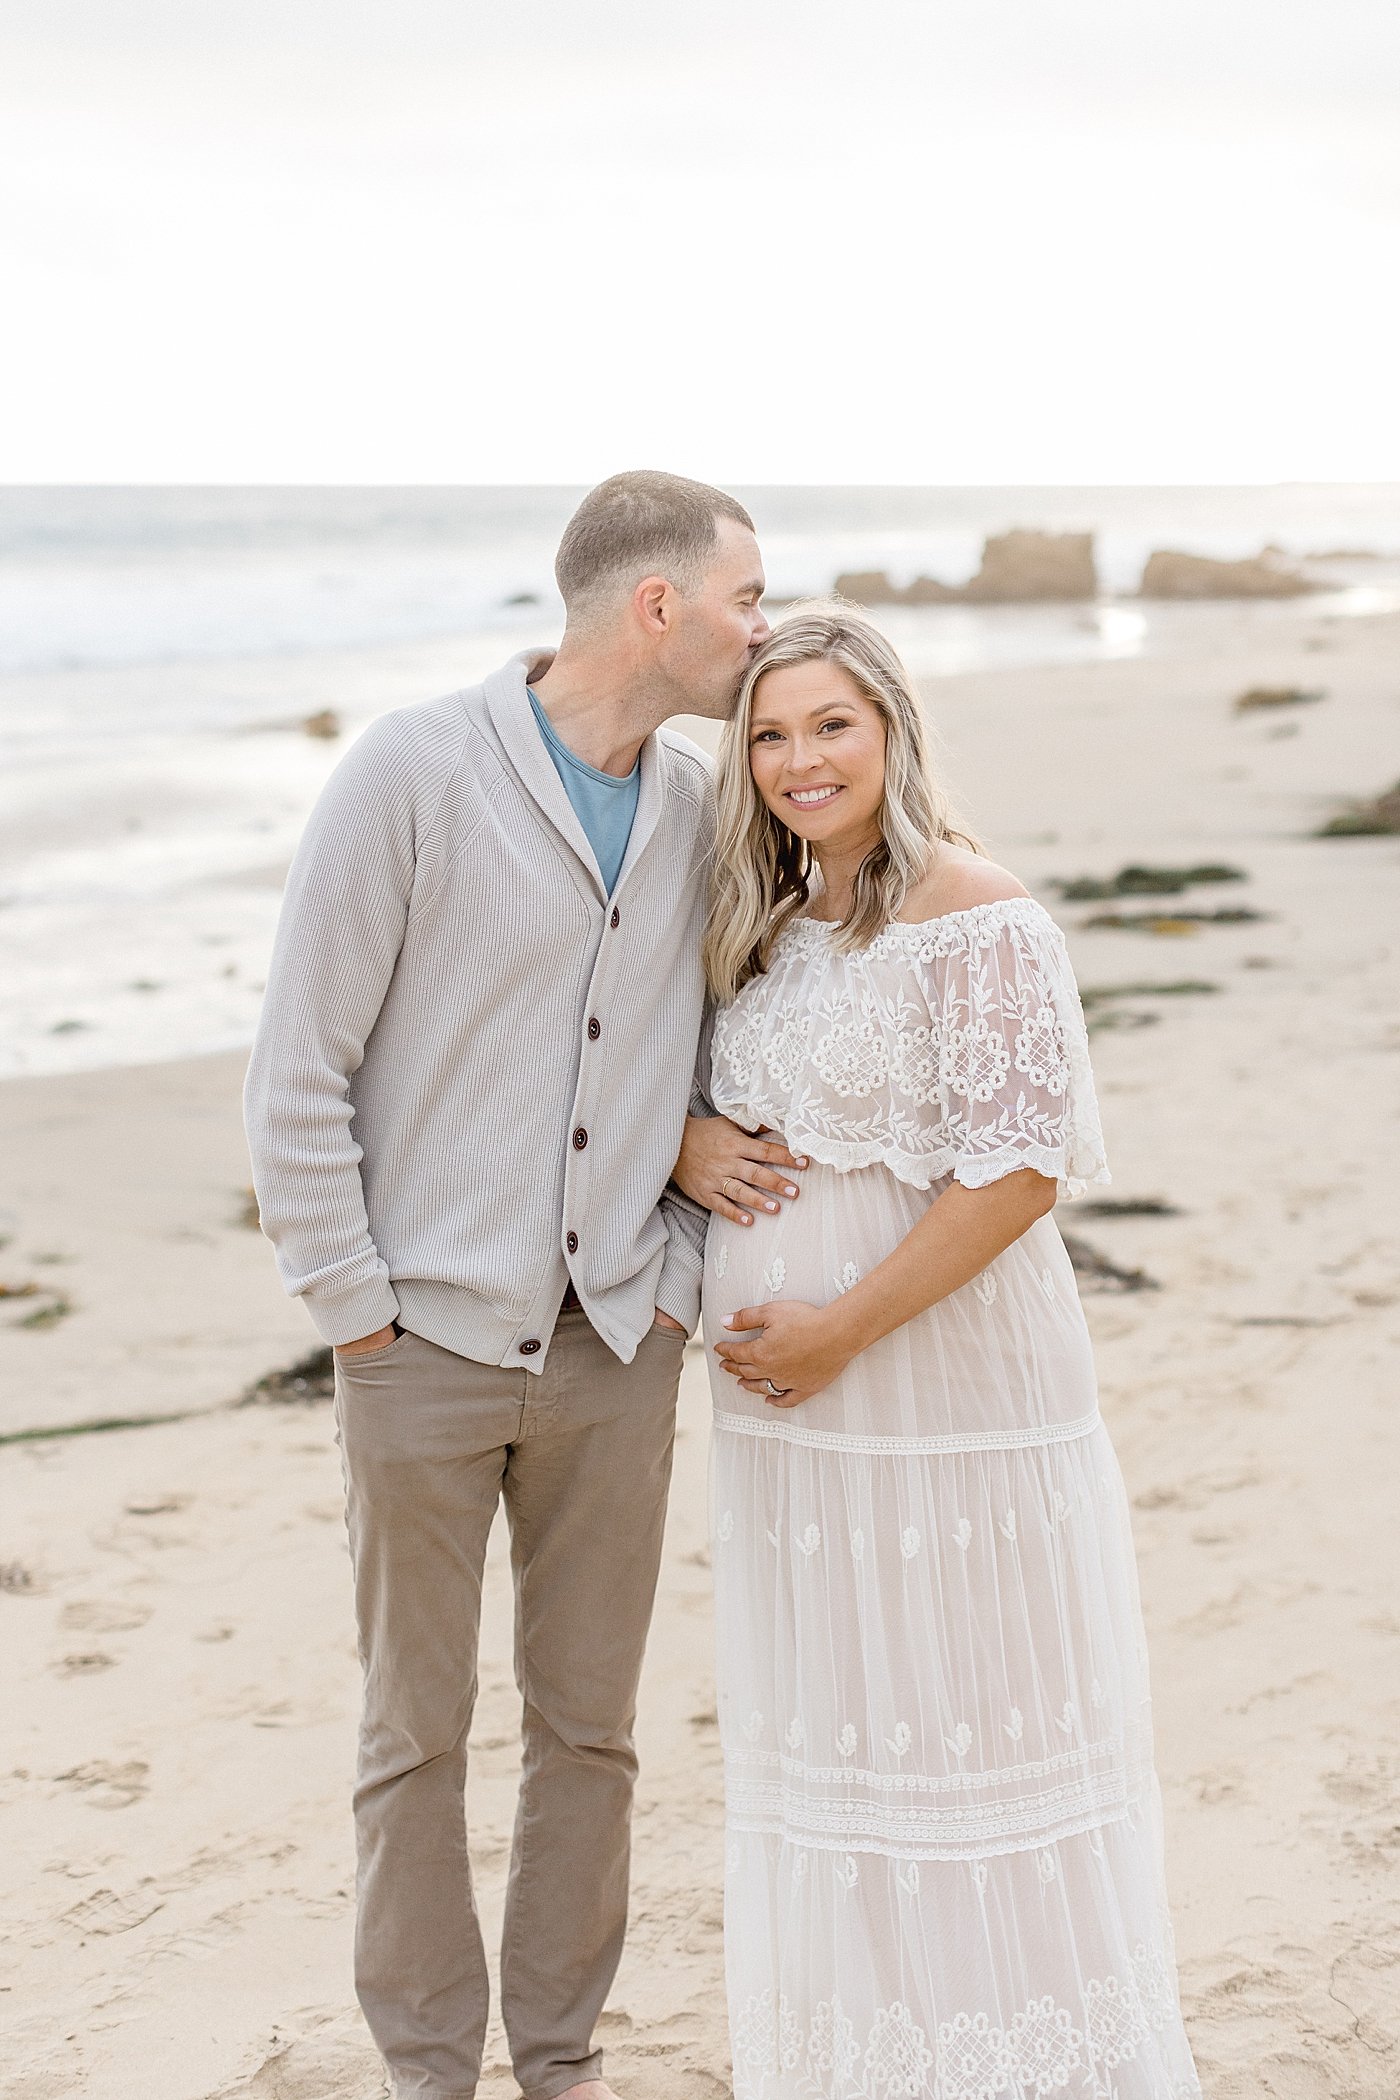 Beach maternity session at Crystal Cove | Ambre Williams Photography